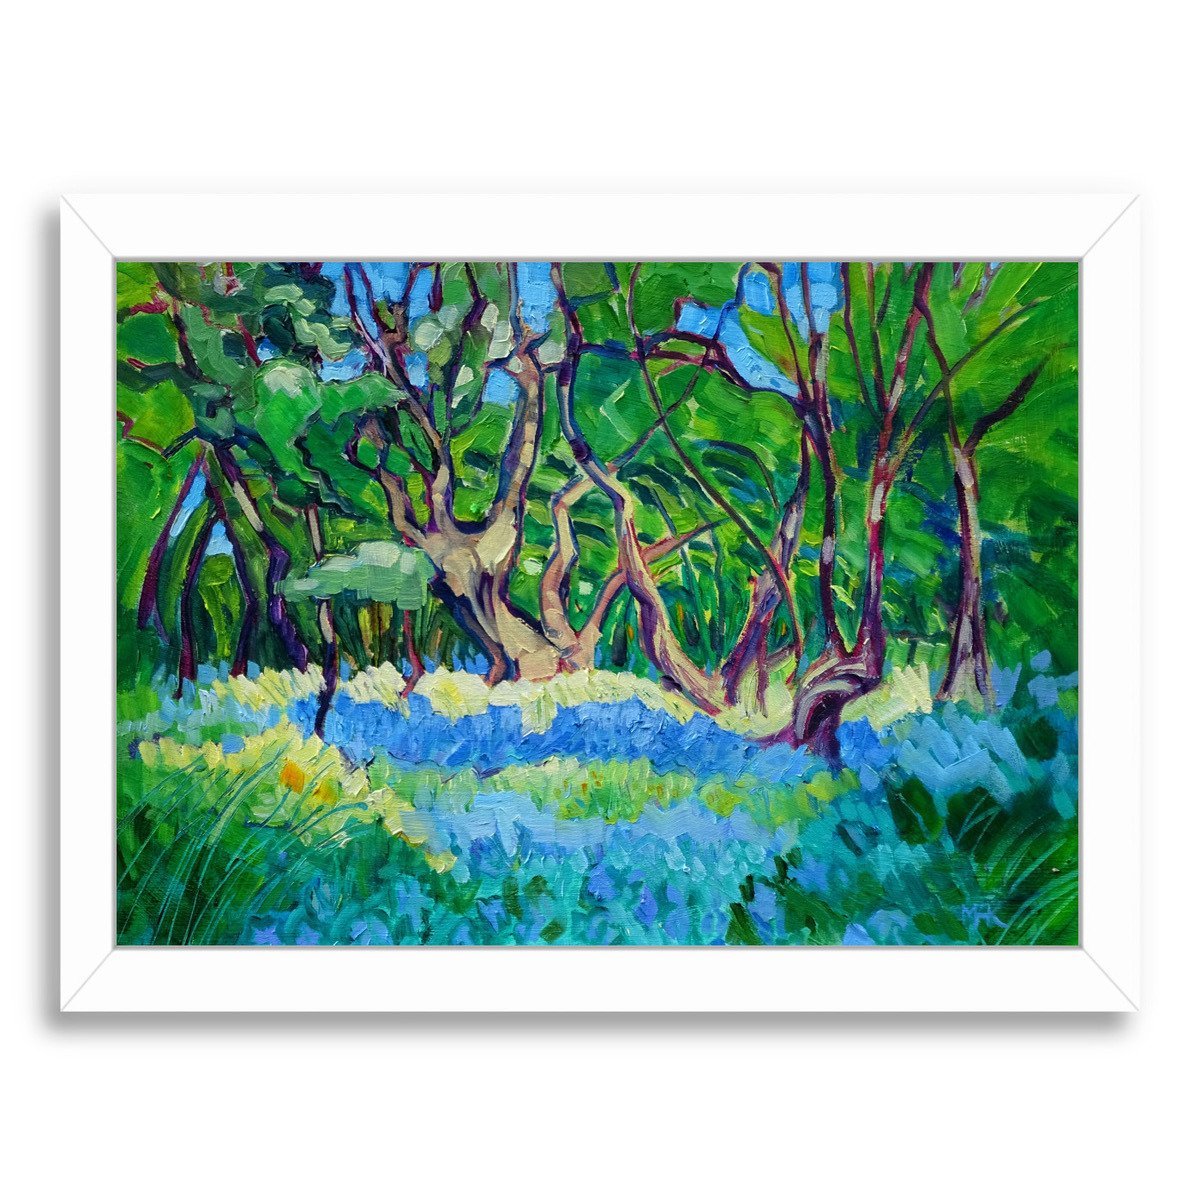 Bluebell Wood By Mary Kemp - Framed Print - Americanflat